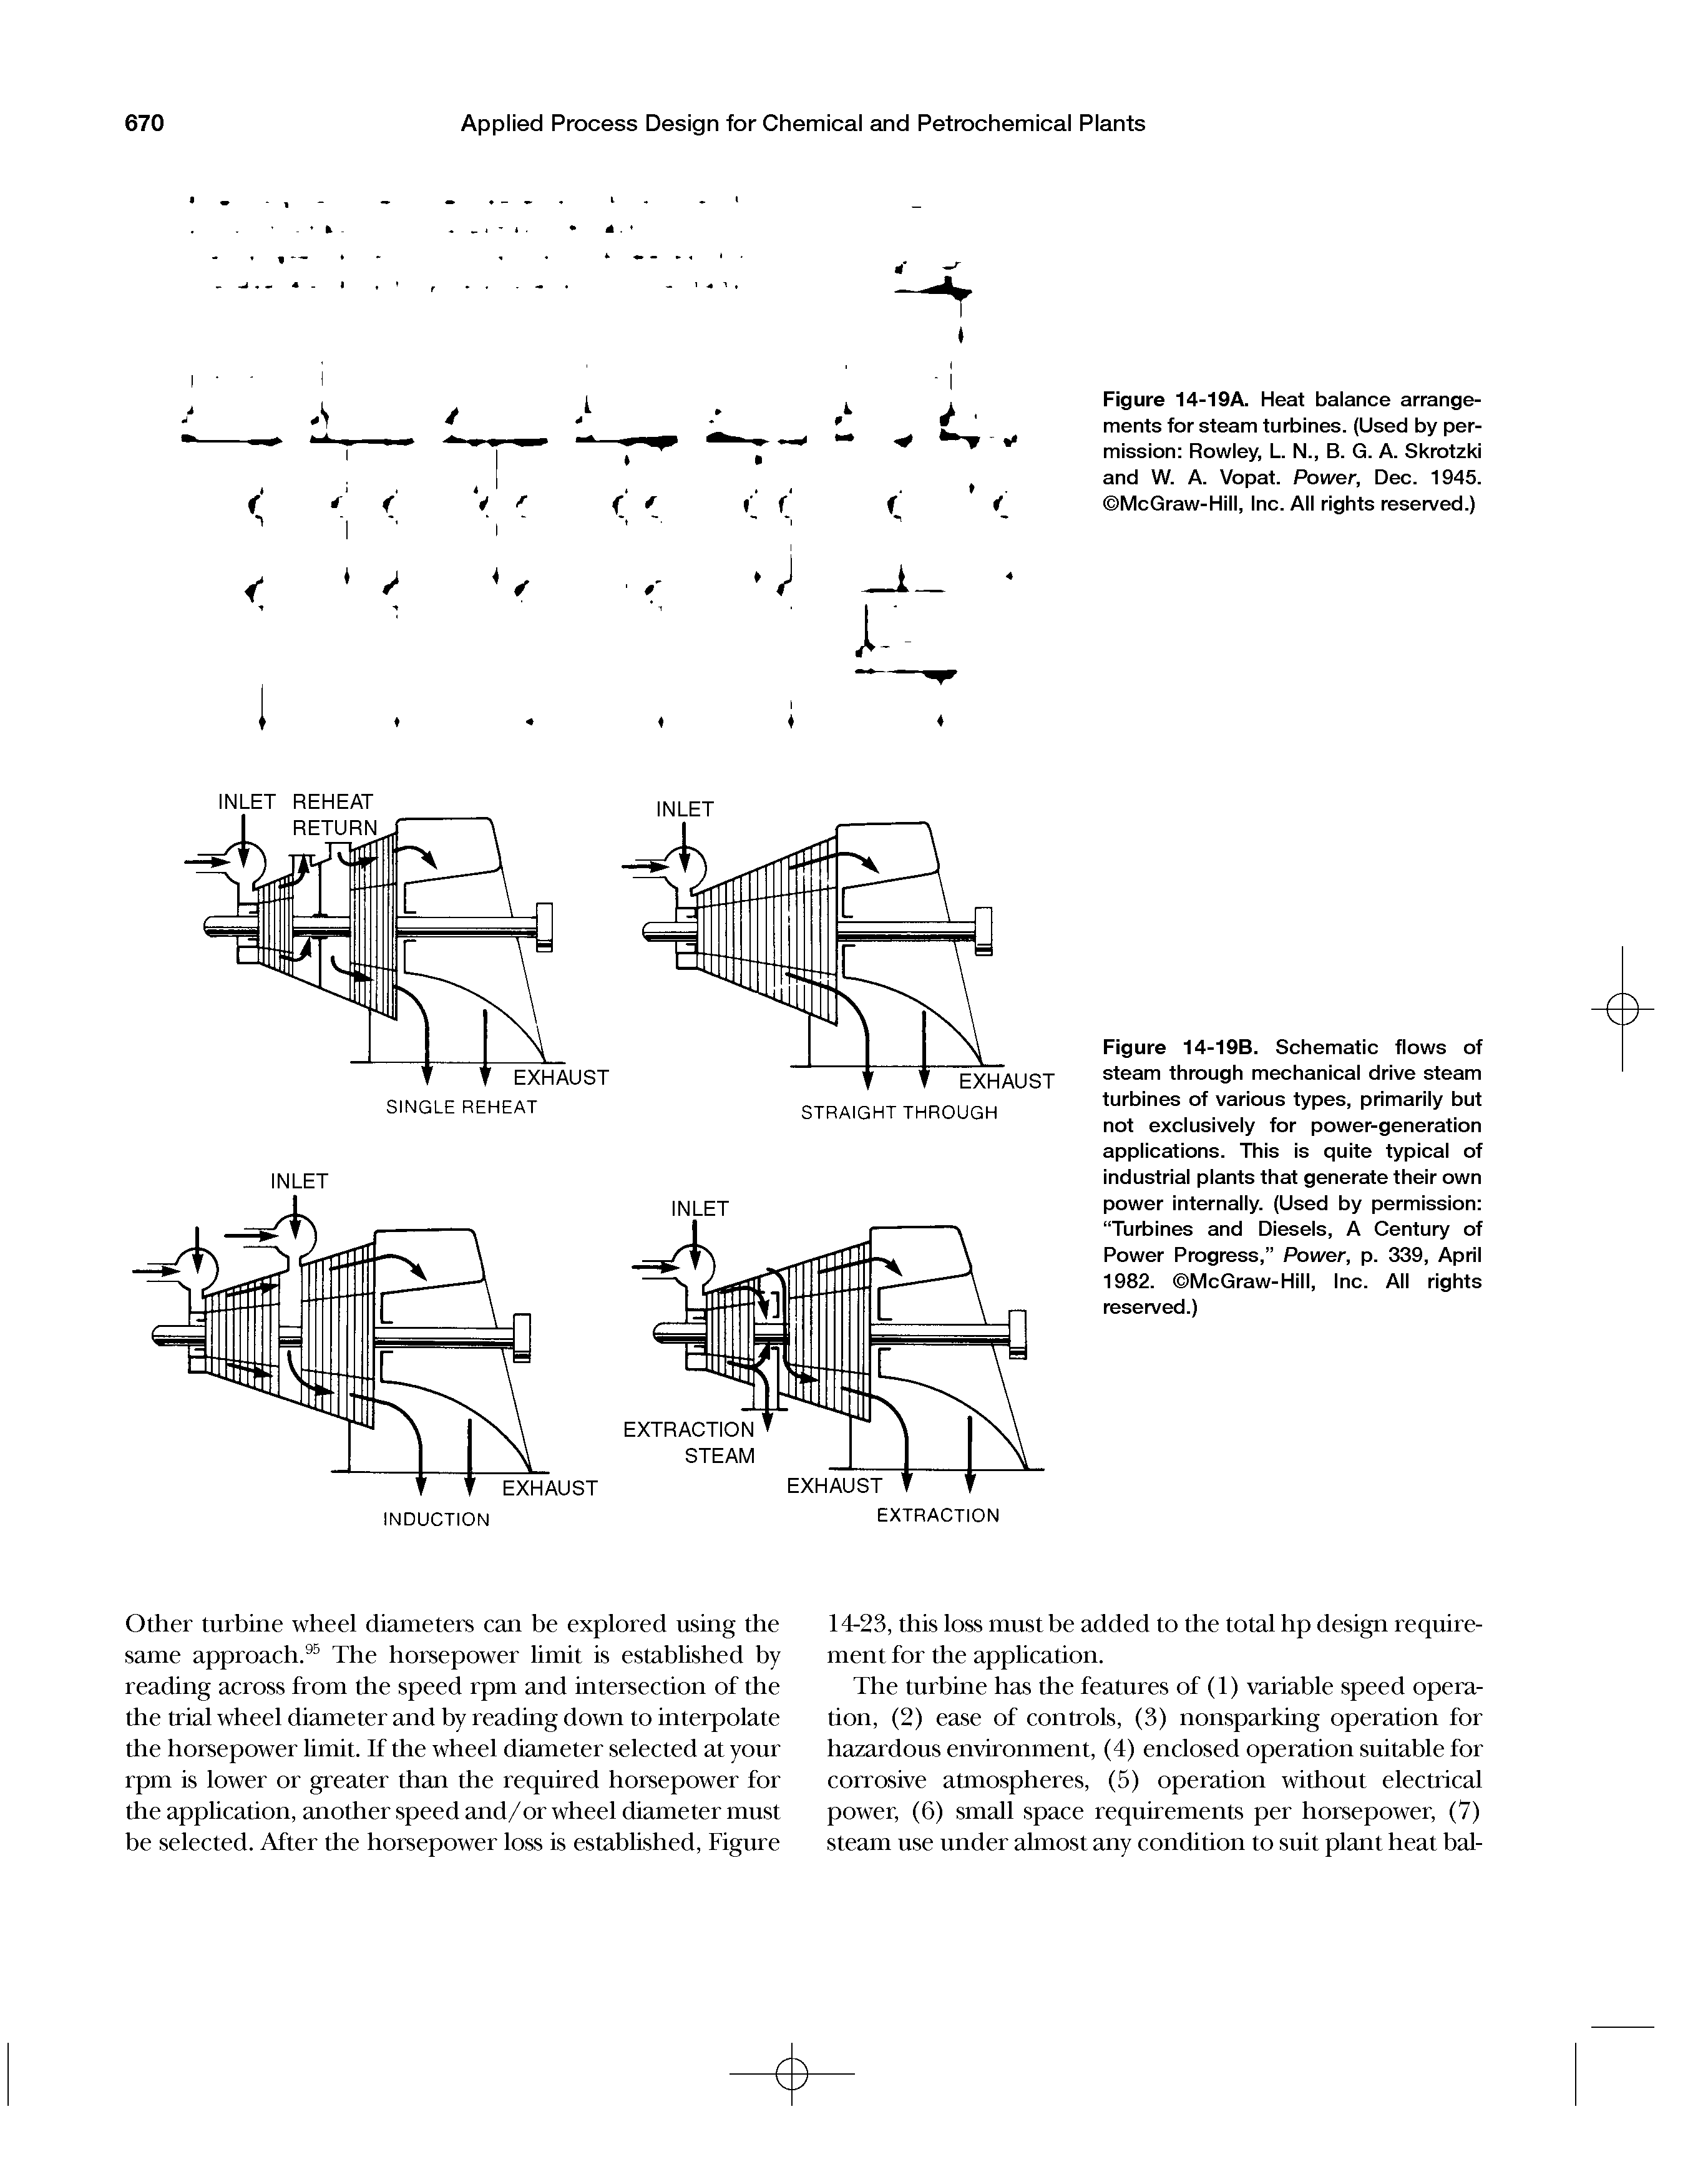 Figure 14-19A. Heat balance arrangements for steam turbines. (Used by permission Rowley, L N., B. G. A. Skrotzki and W. A. Vopat. Power, Dec. 1945. McGraw-Hill, Inc. All rights reserved.)...